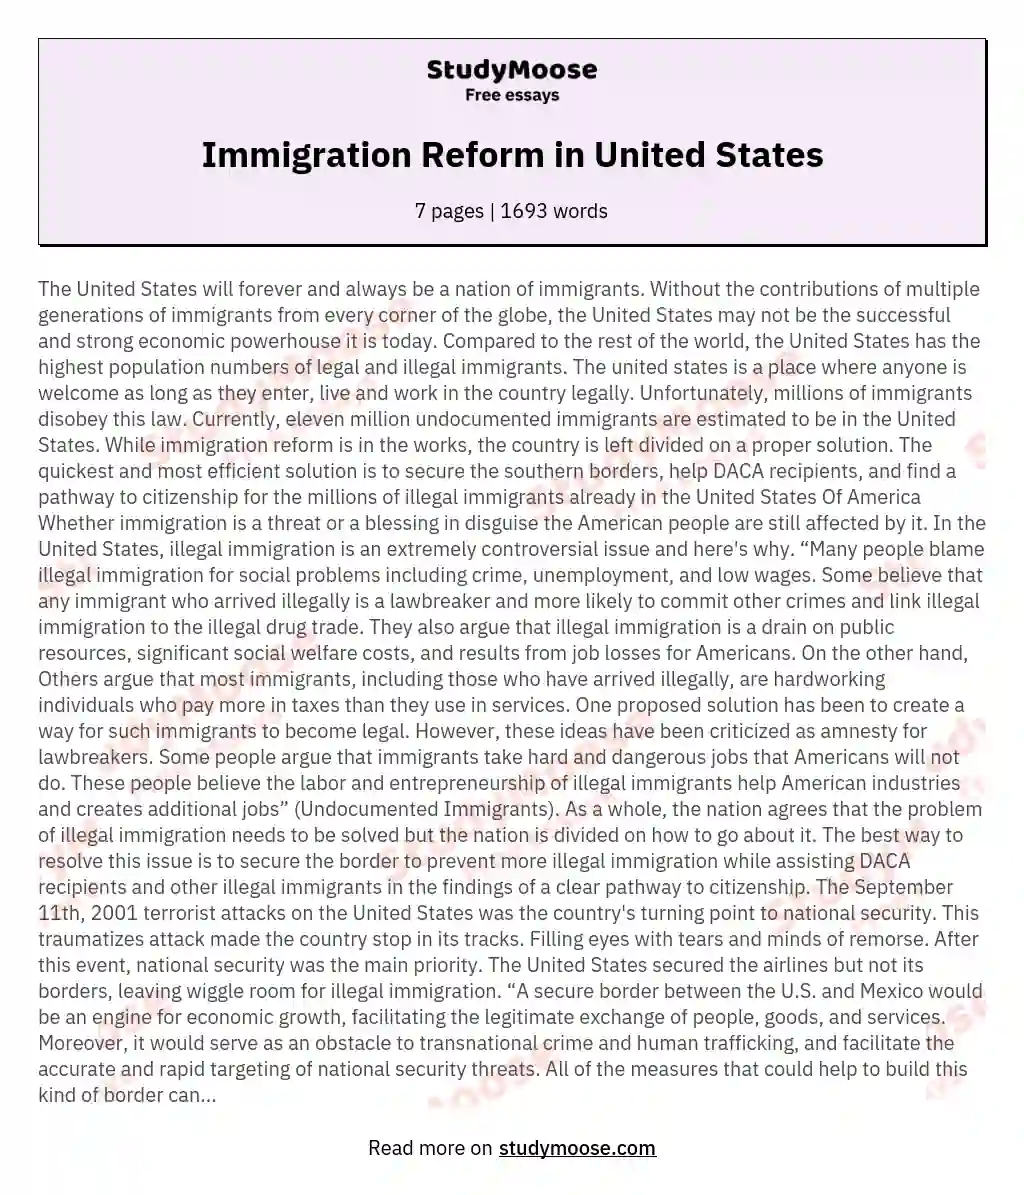 Immigration Reform in United States essay